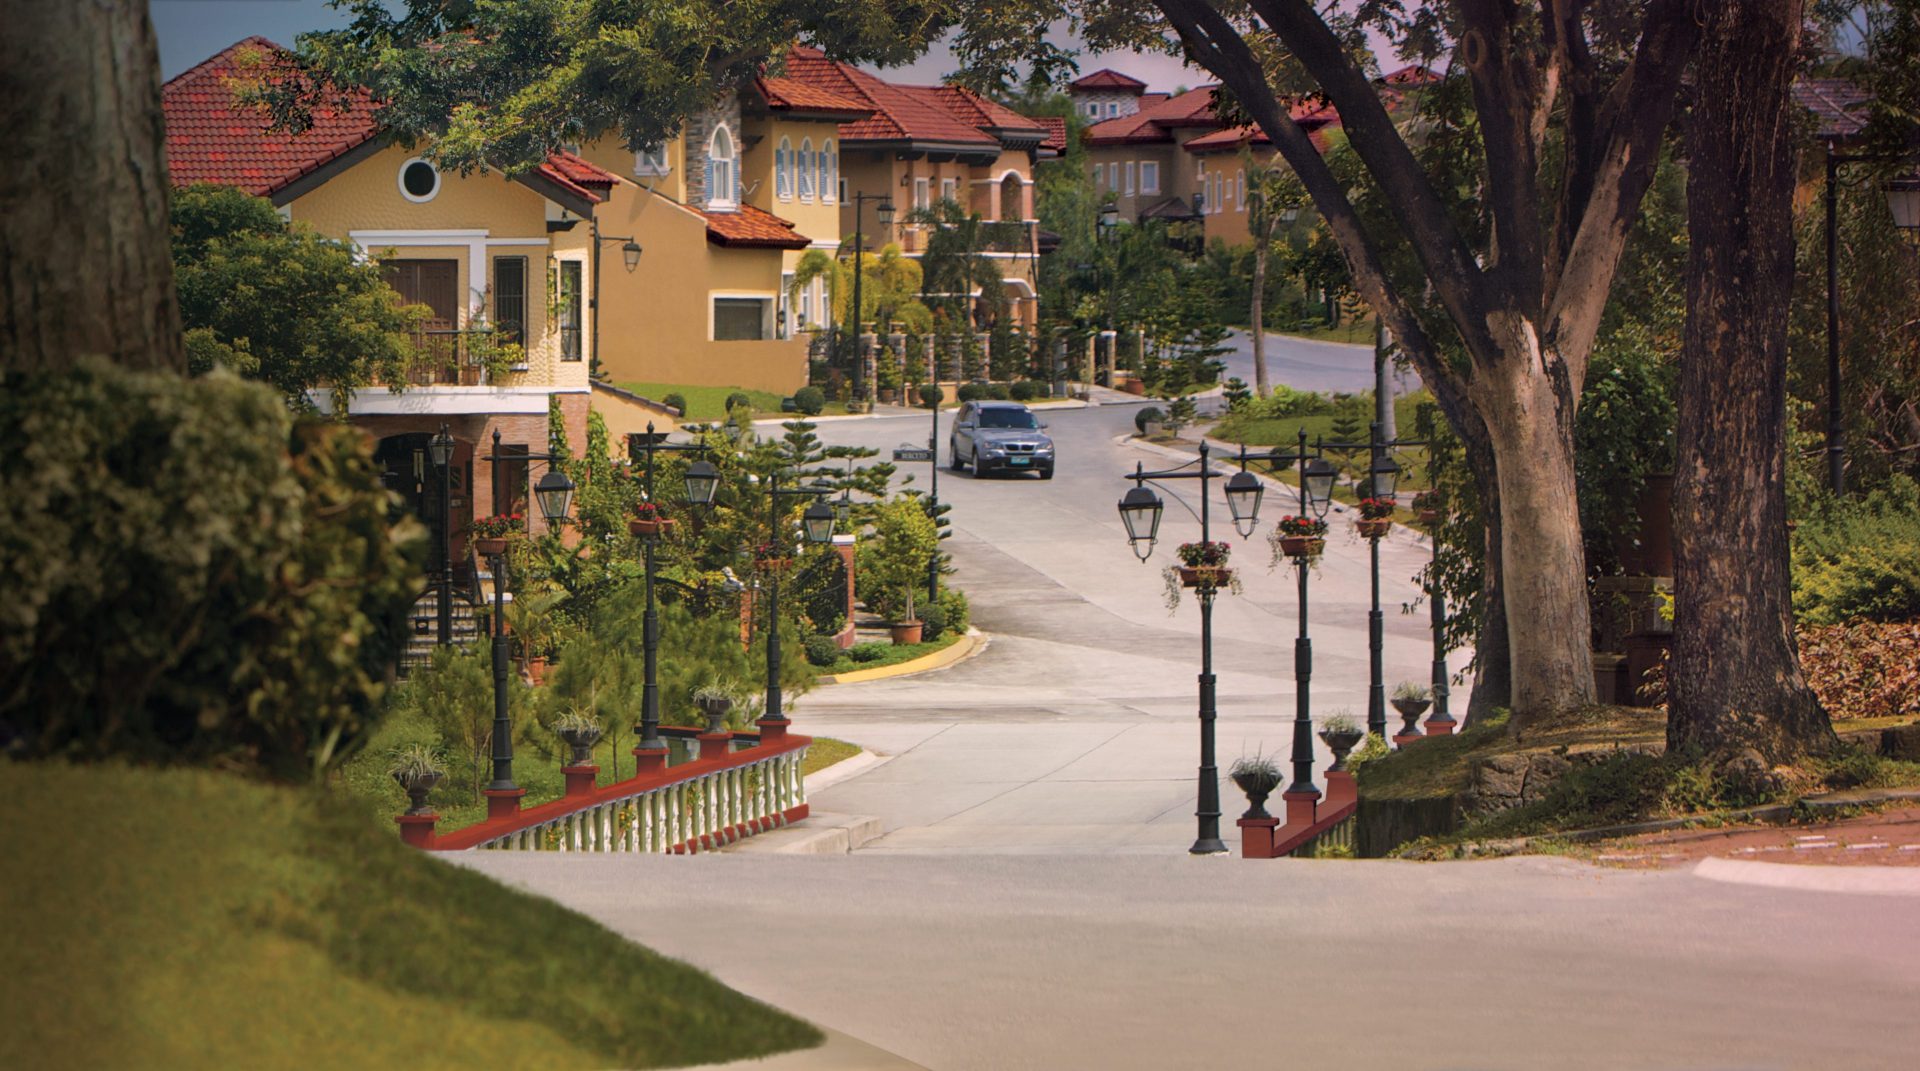 Portofino Alabang has exceptional amenities and facilities to cater your needs